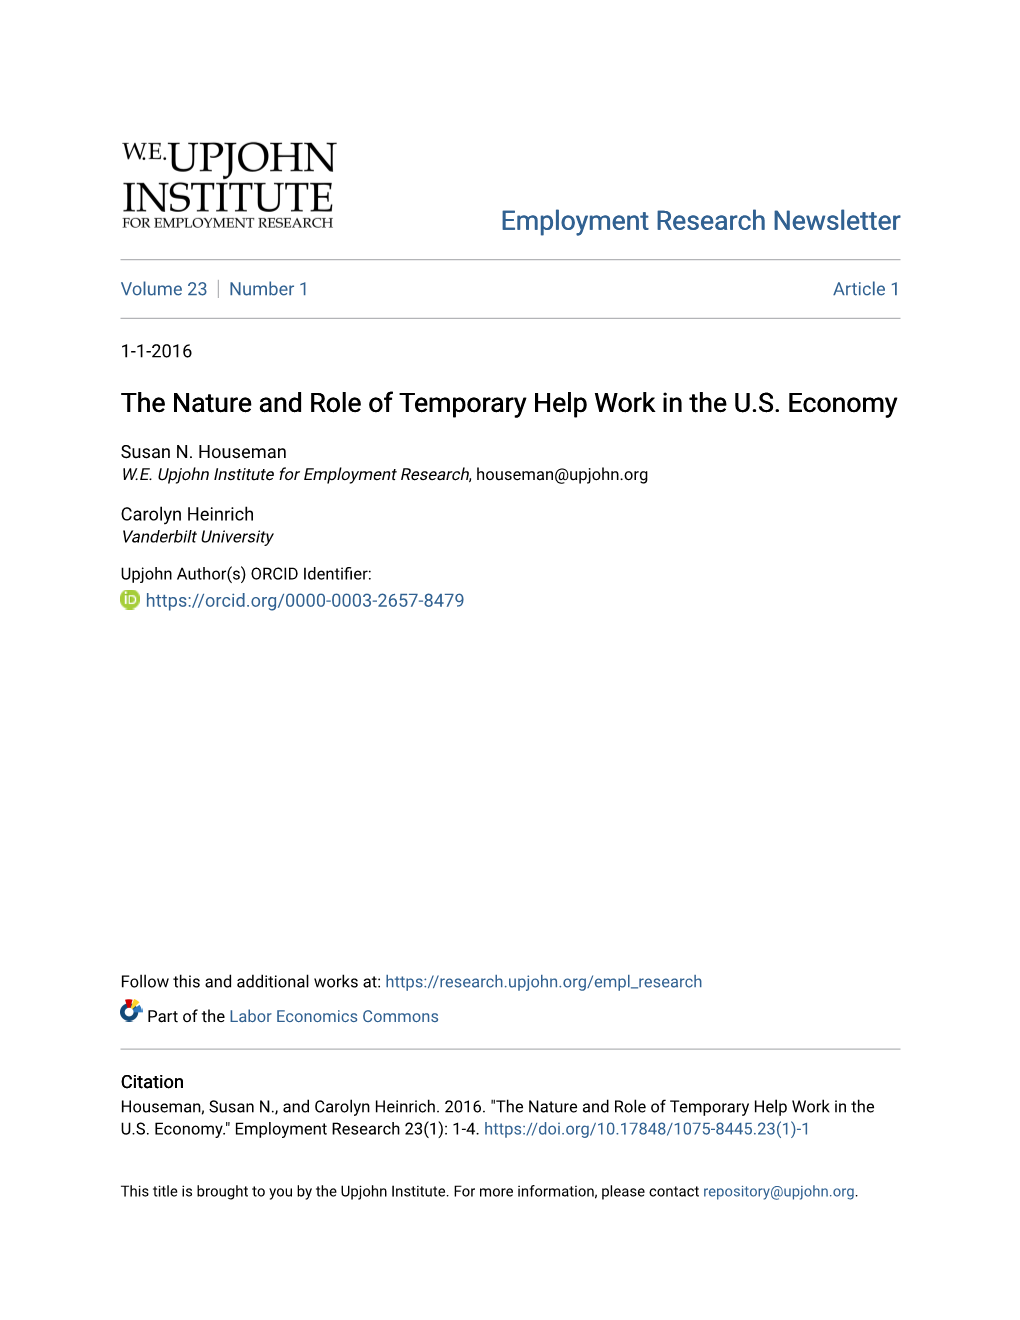 The Nature and Role of Temporary Help Work in the U.S. Economy